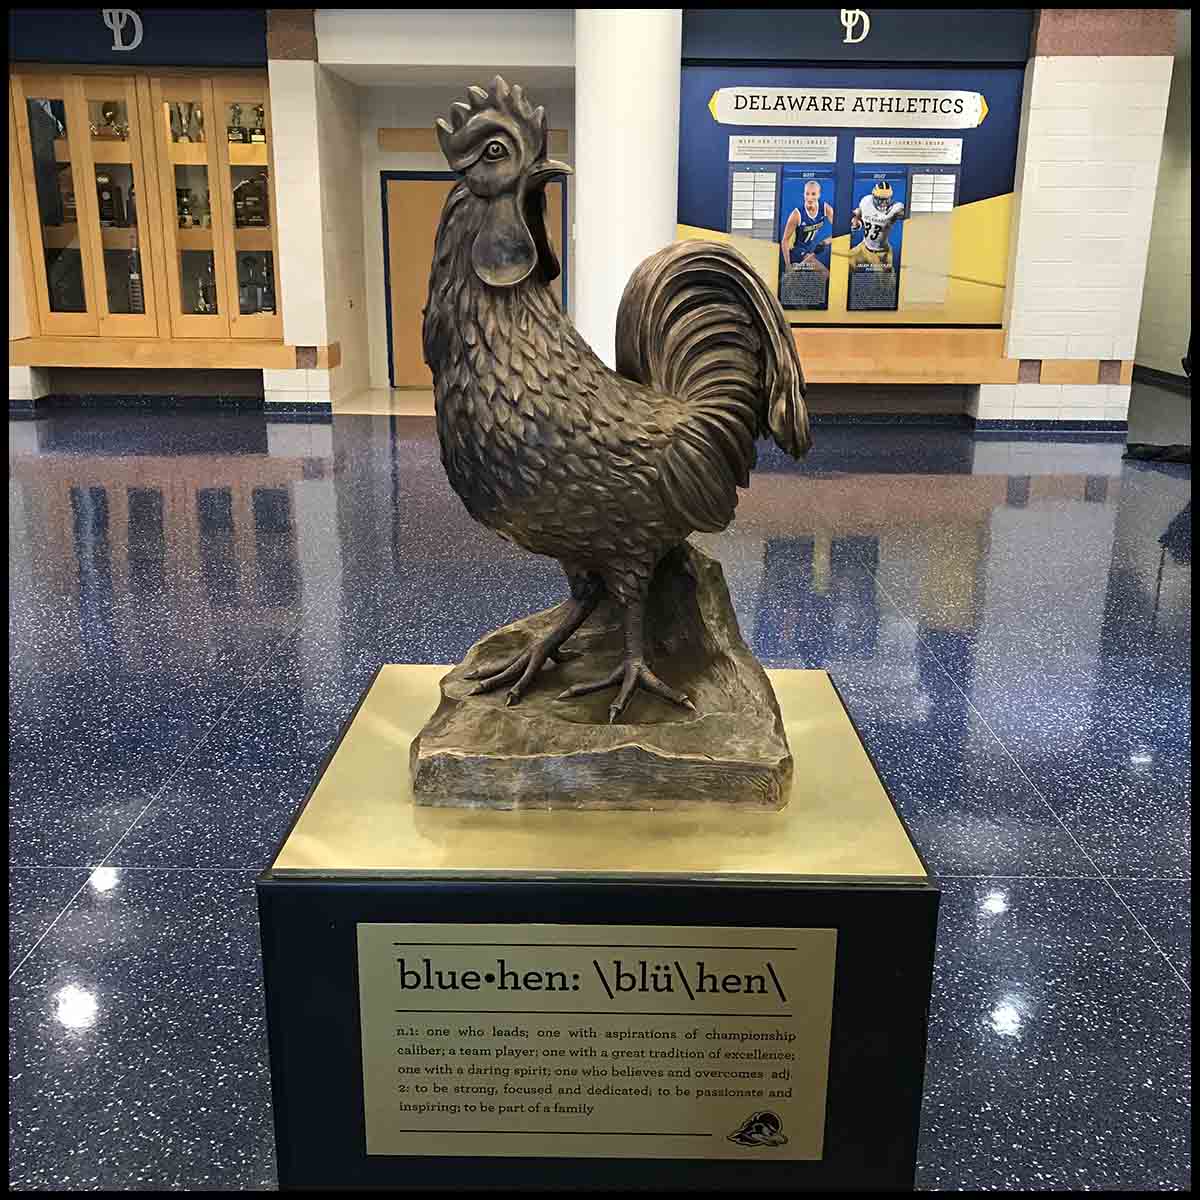 photo of bronze sculpture of hen on black and gold base in large room with blue floor